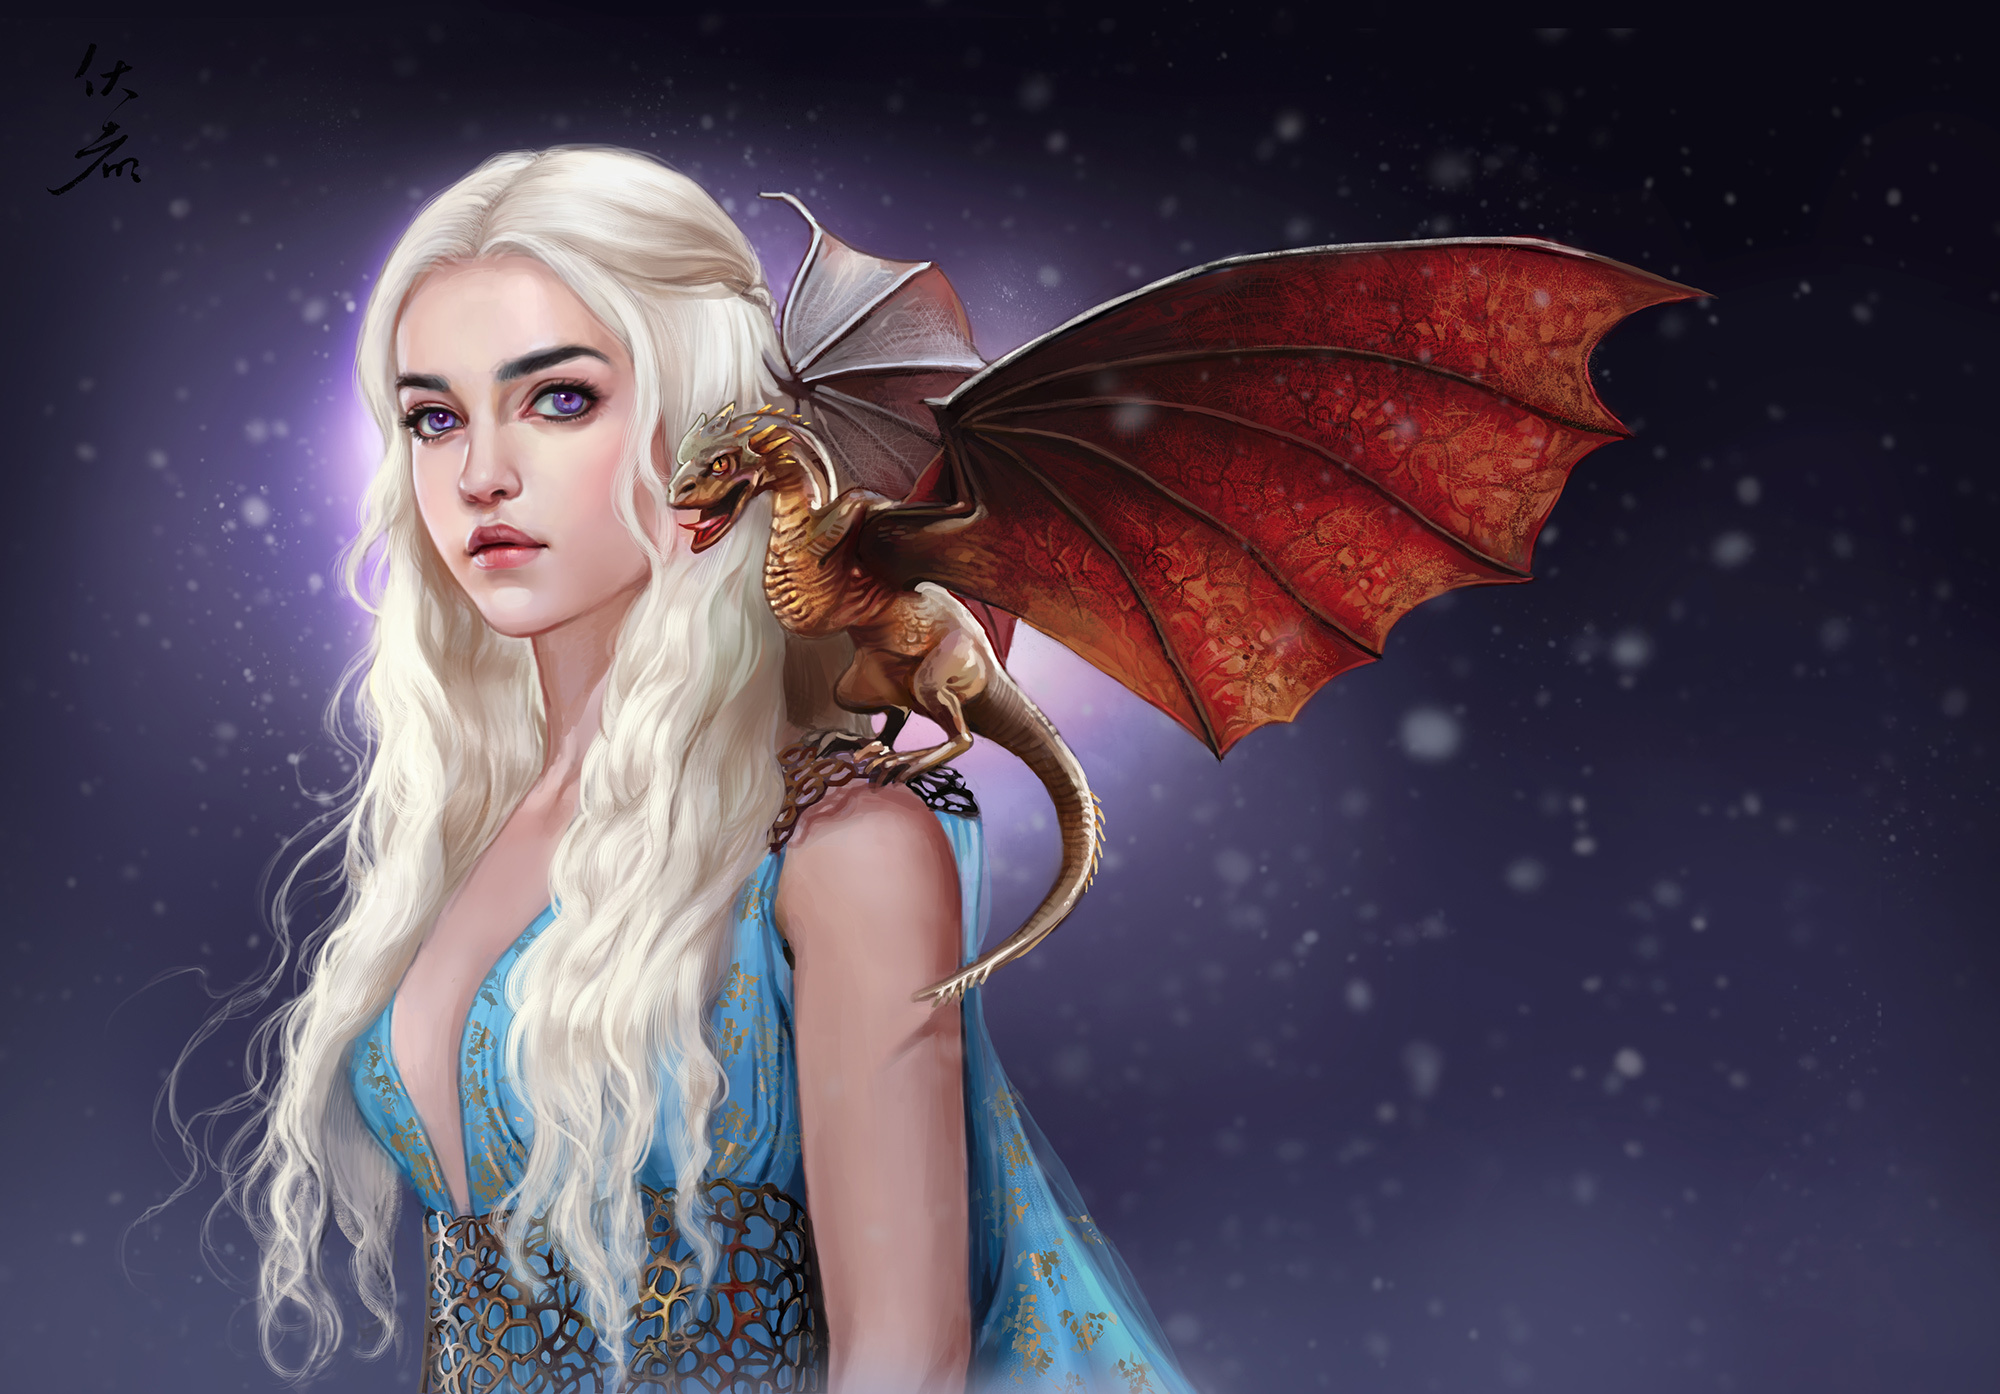 Dragon Game Of Thrones Daenerys Targaryen A Song Of Ice And Fire 2000x1394